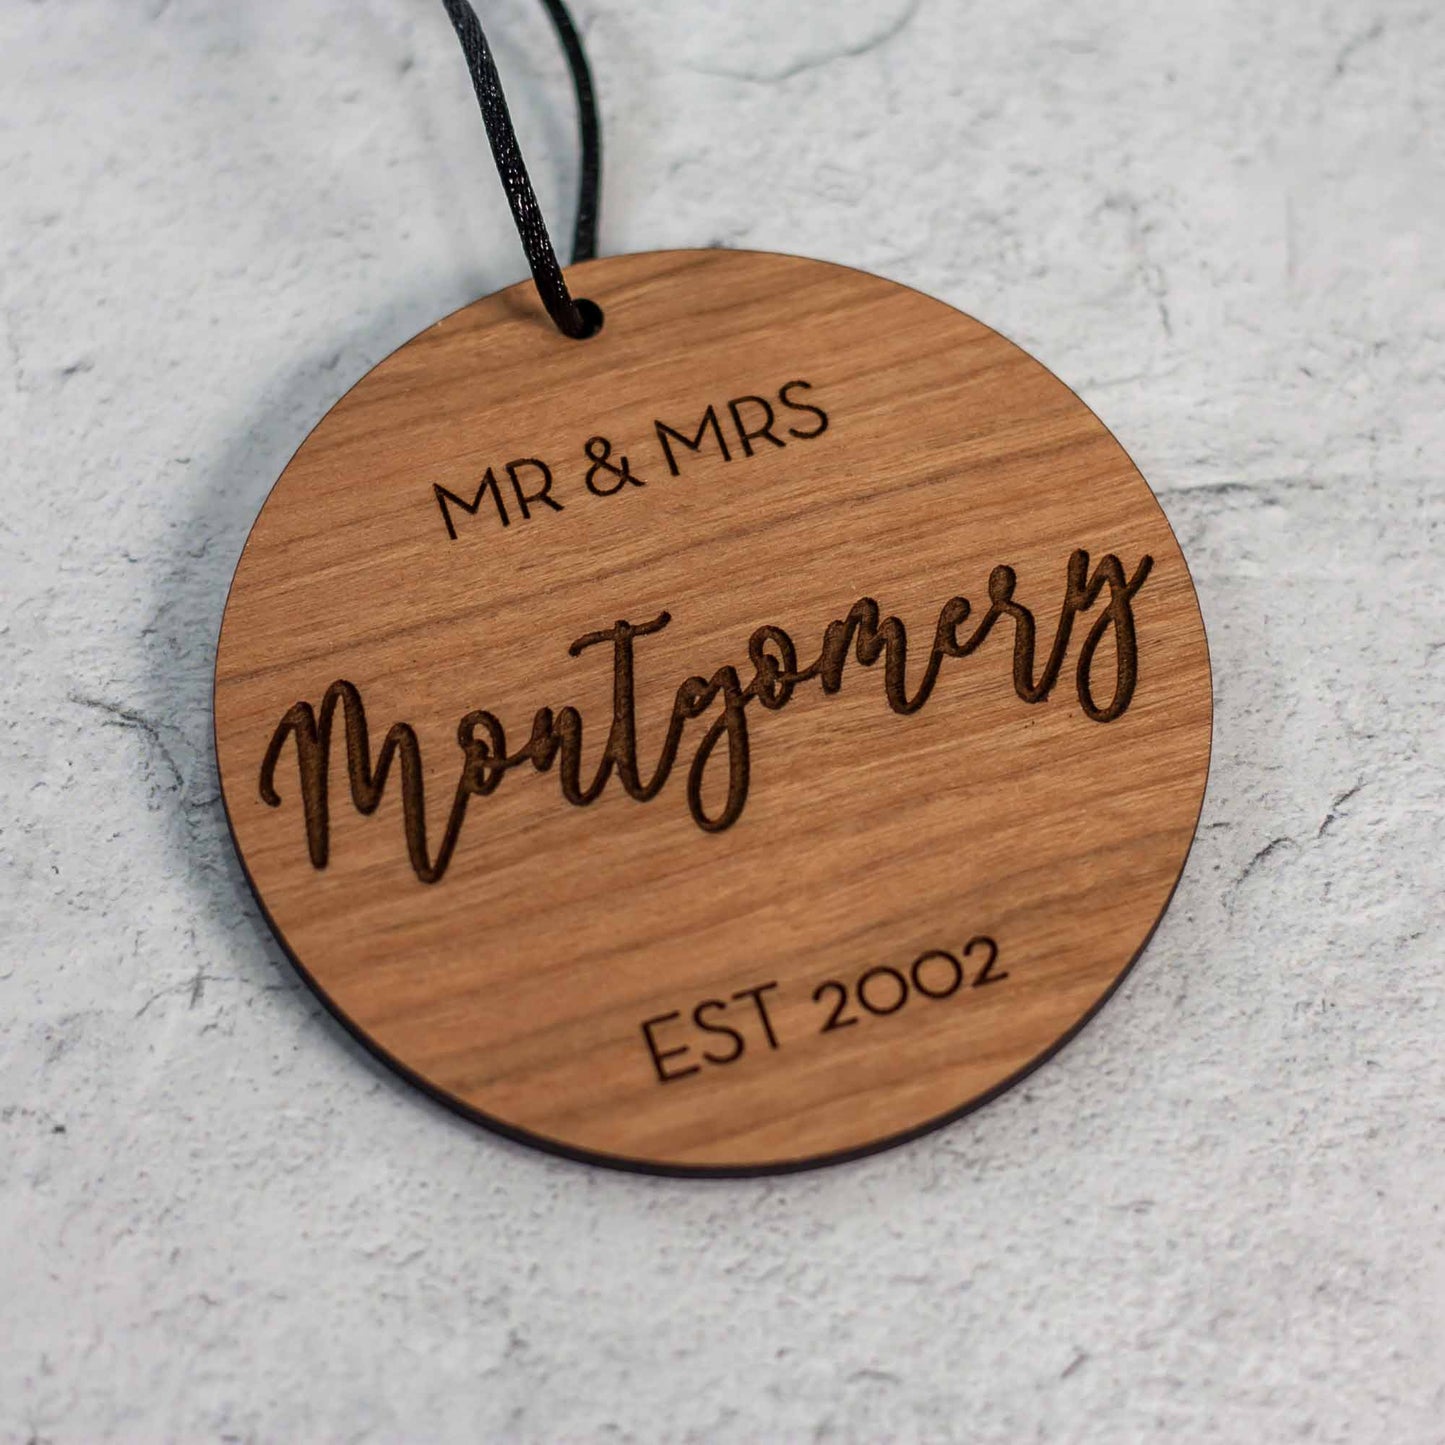 Custom Wood Ornaments - Mr and Mrs Laser Cut and Laser Engraved in Cherry Wood by LeeMo Designs in Bend, Oregon